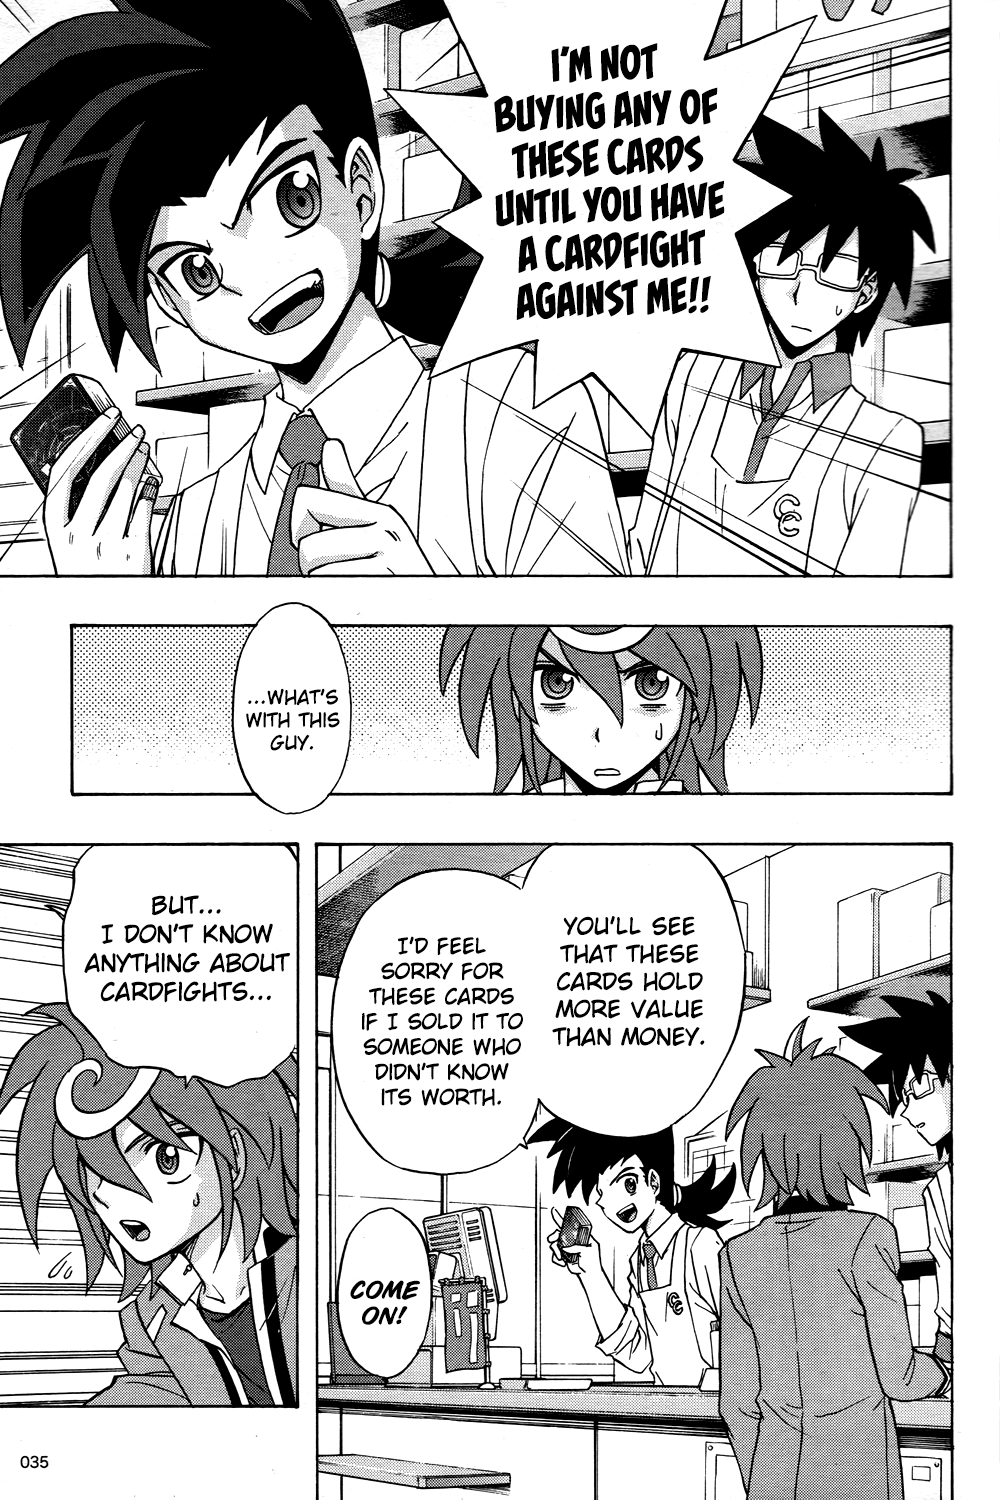 Cardfight!! Vanguard G: The Prologue - Page 1